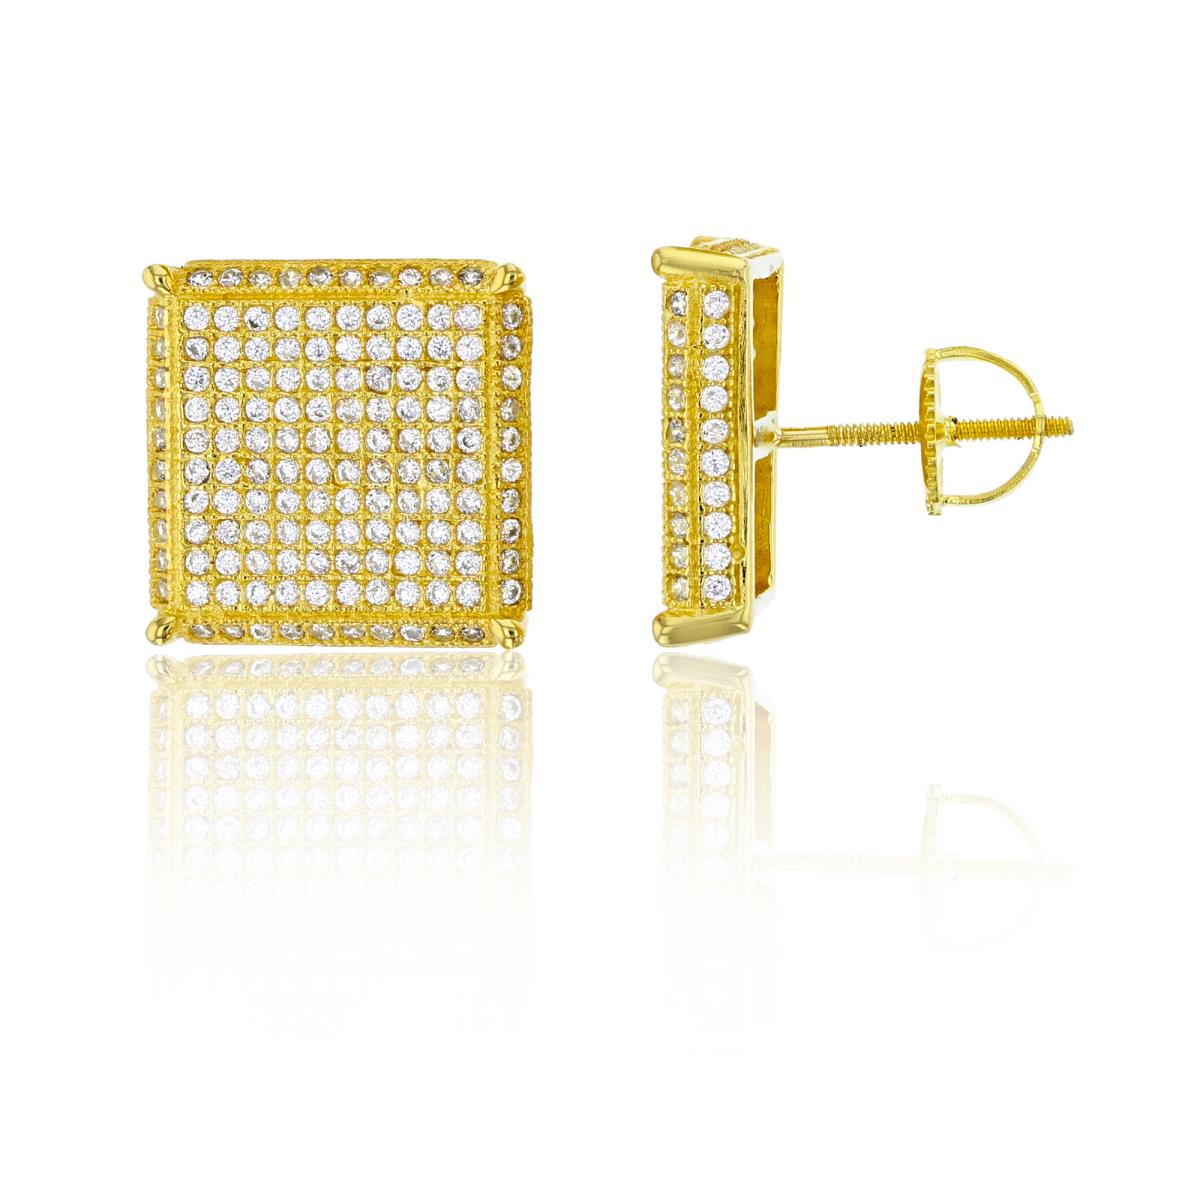 Sterling Silver Yellow Micropave Square 15x15mm Screw-Back Stud Earring